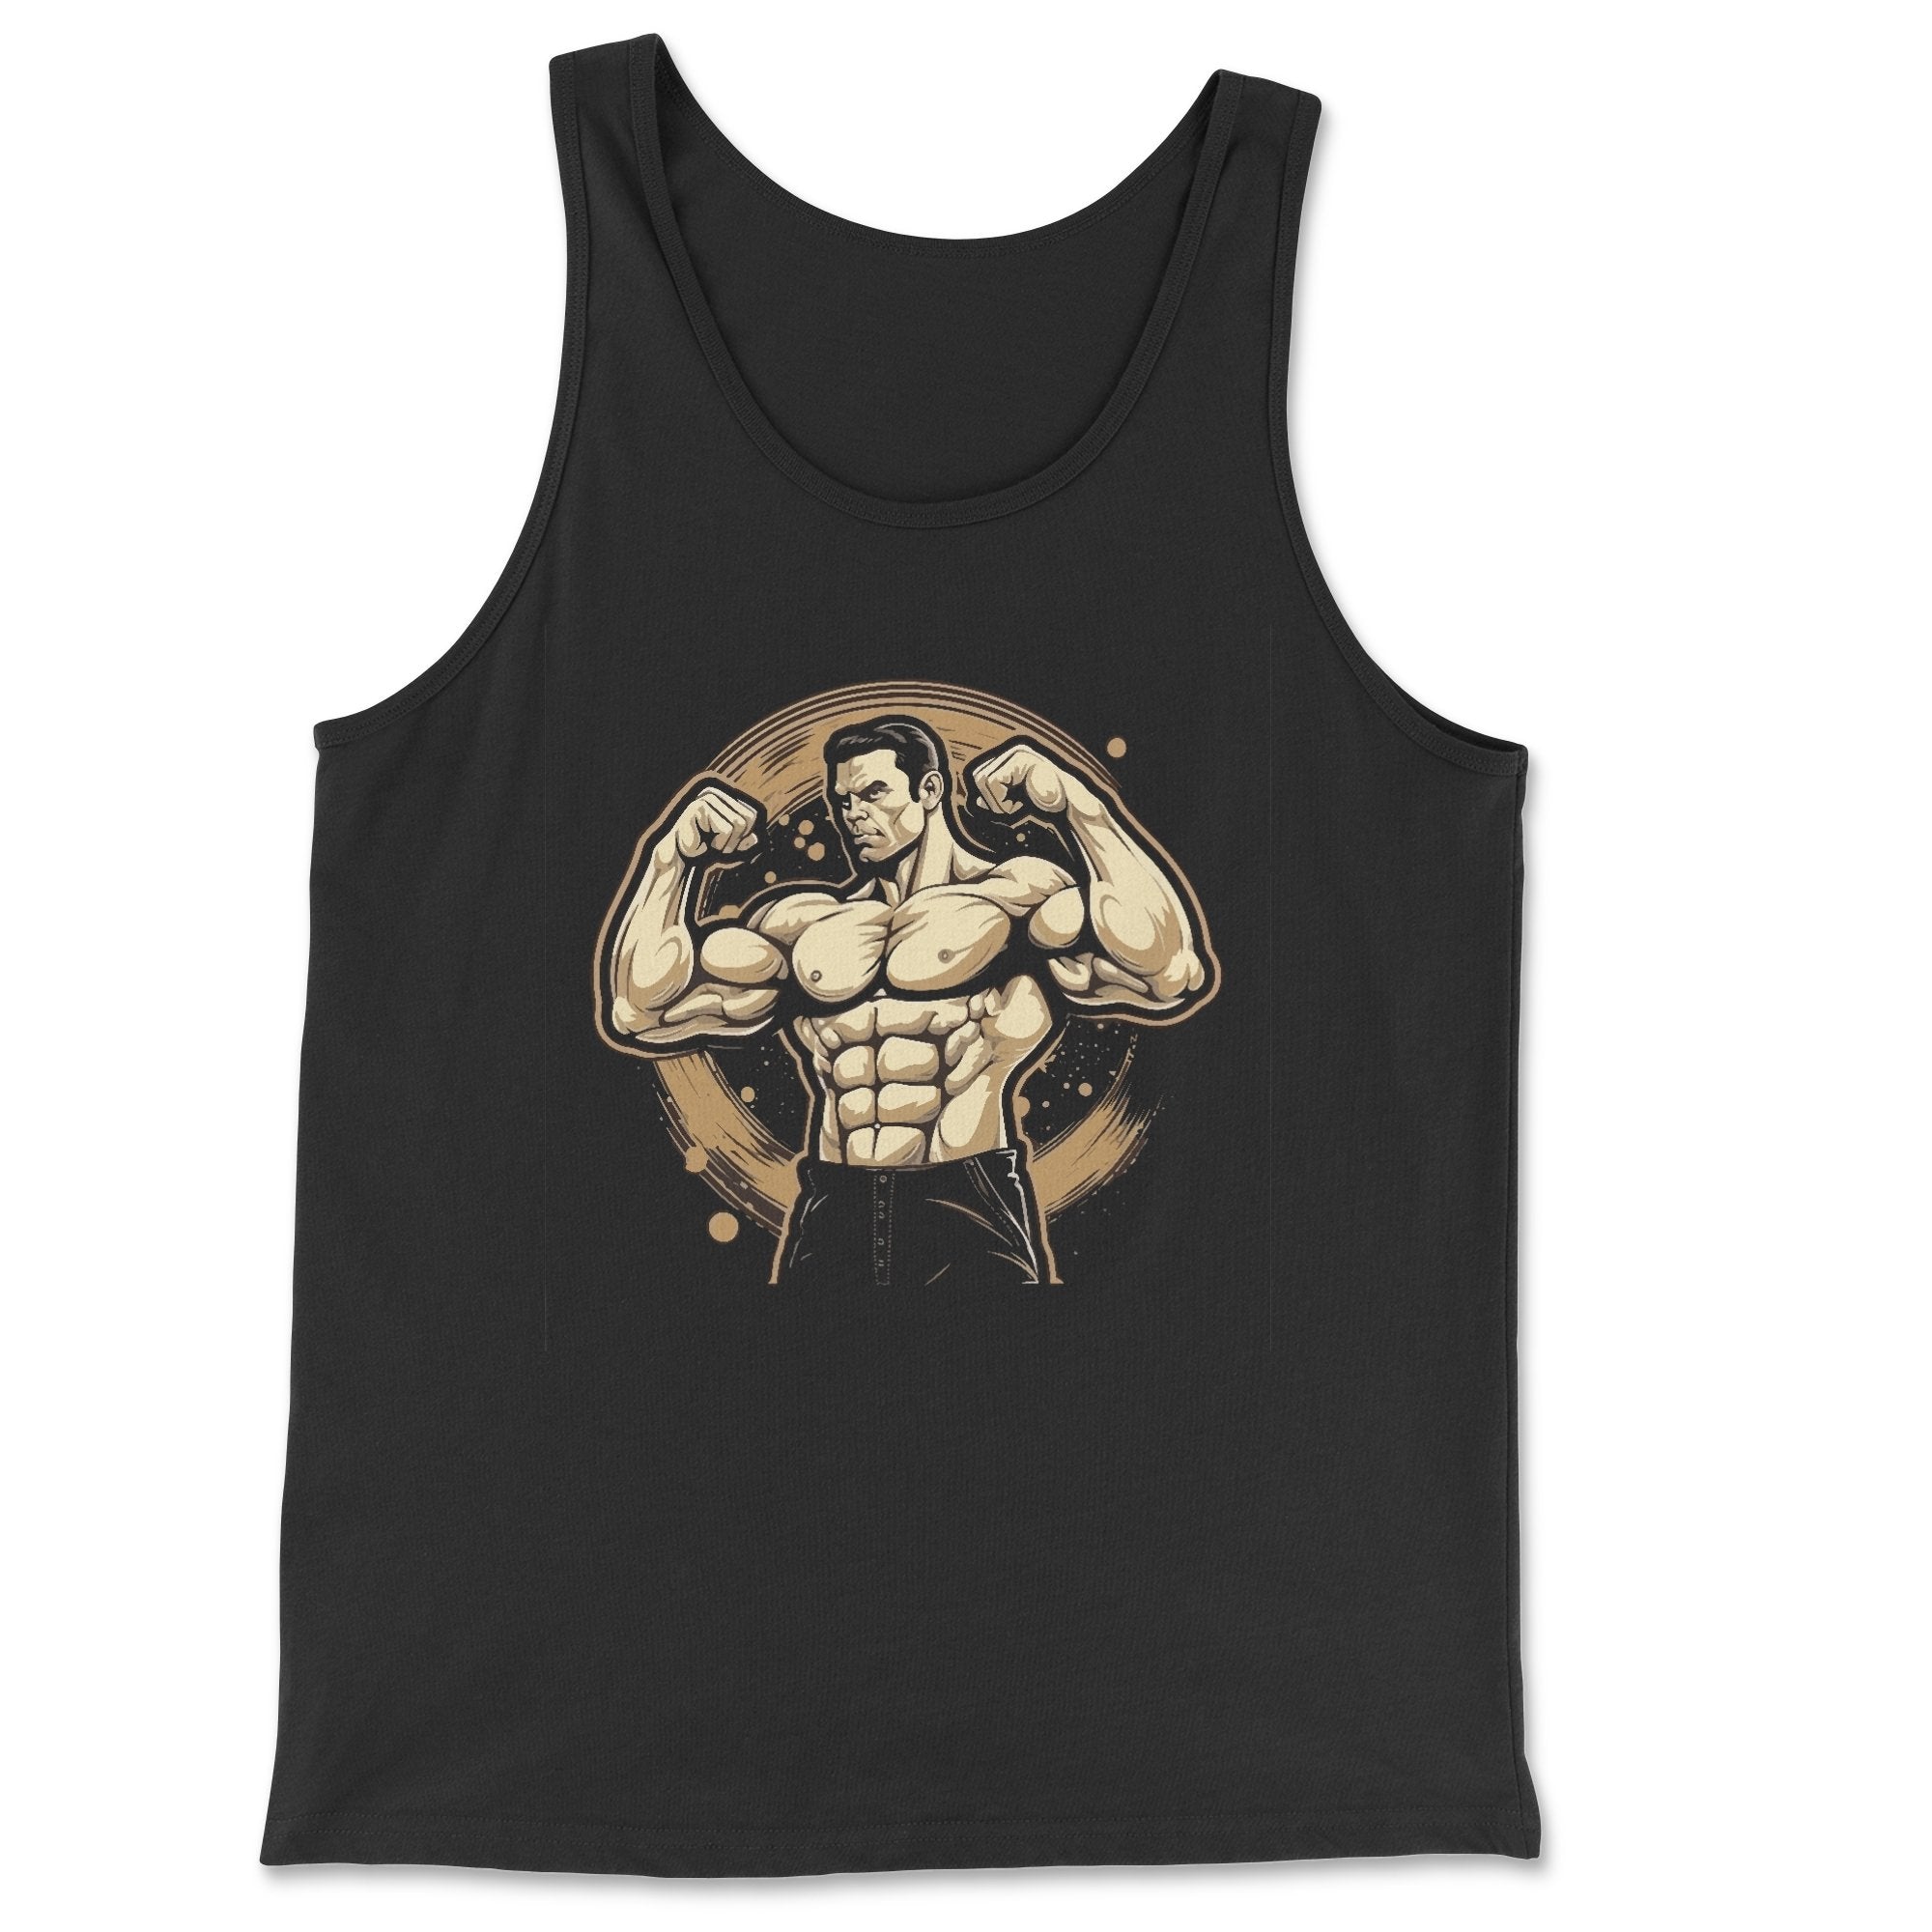 Flexing Bodybuilder Tank Top - Athletic Power Statement - Hunky Tops